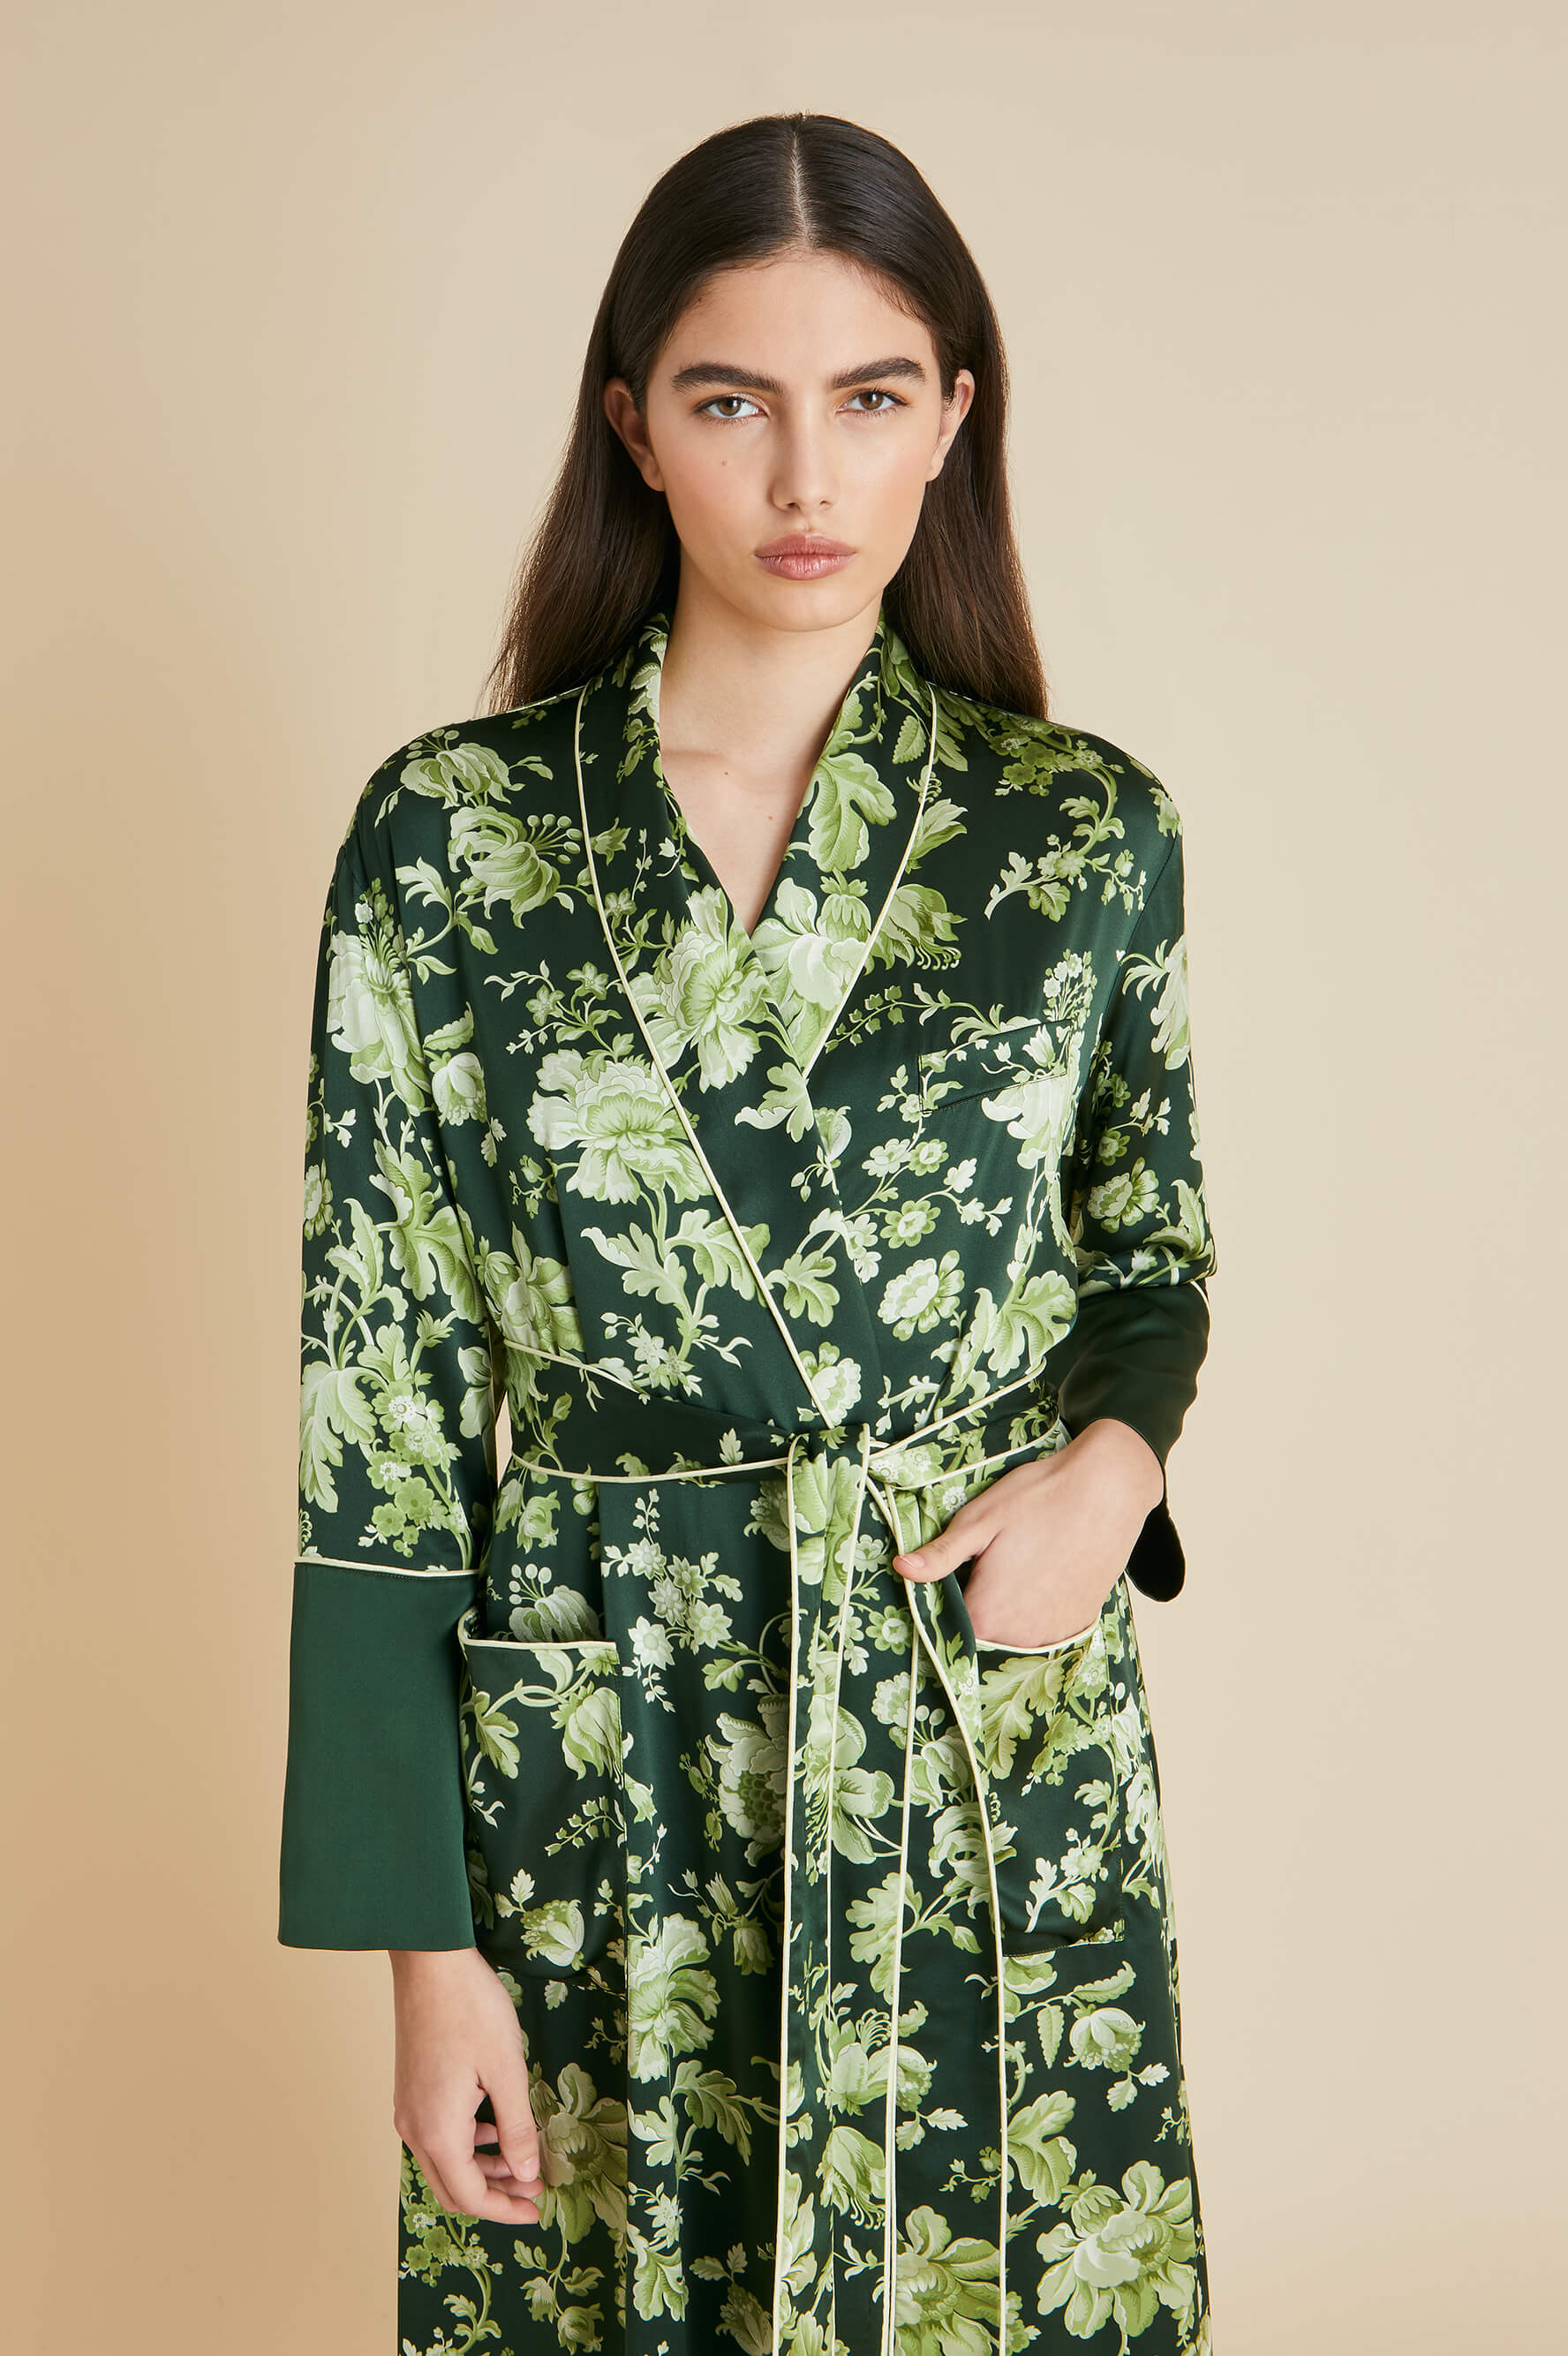 Capability Ares Green Floral Robe in Silk Satin